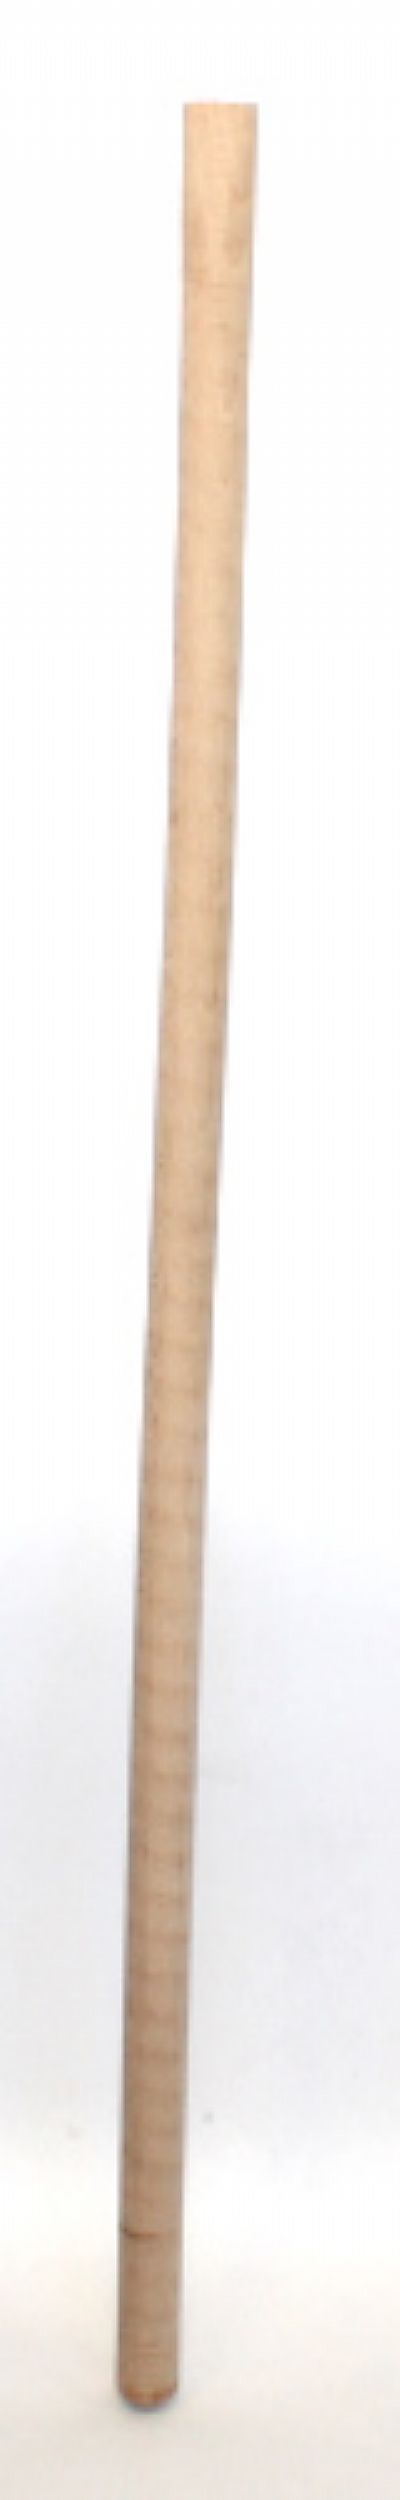 WOODEN HANDLE FOR PICKAXE